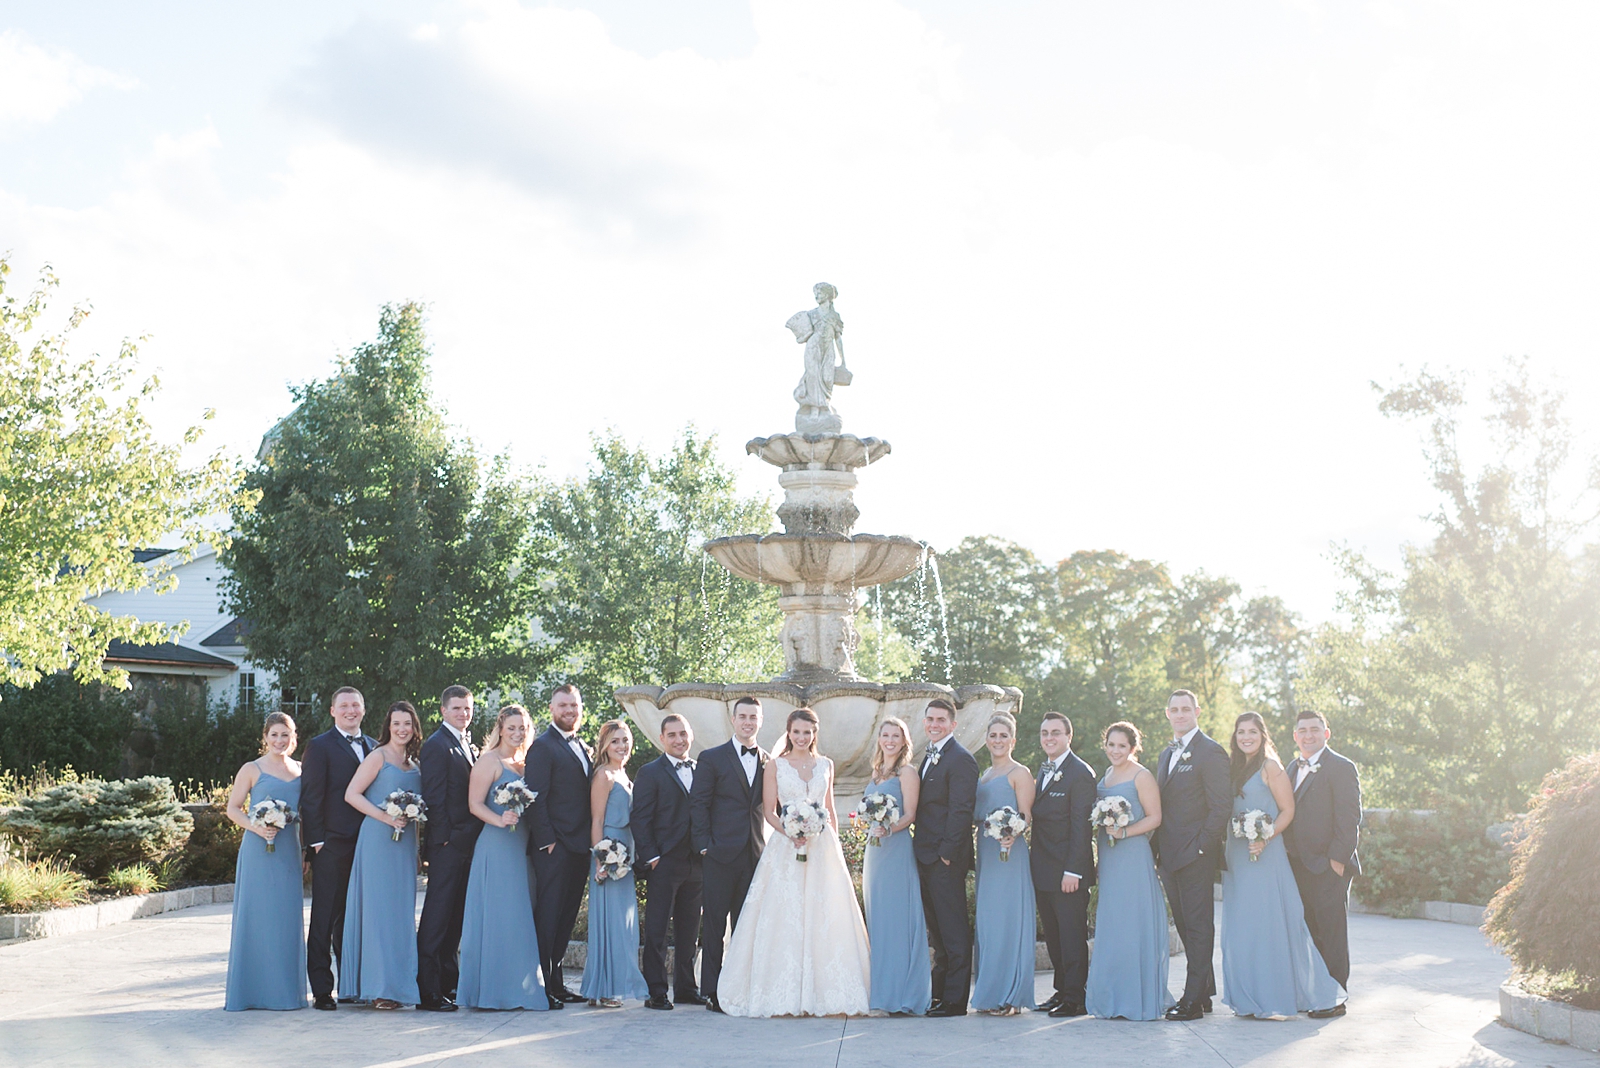 bridal party on wedding day with blue dresses and tuxedos pose with bride and groom in front of fountain at Trump National Golf Club Westchester